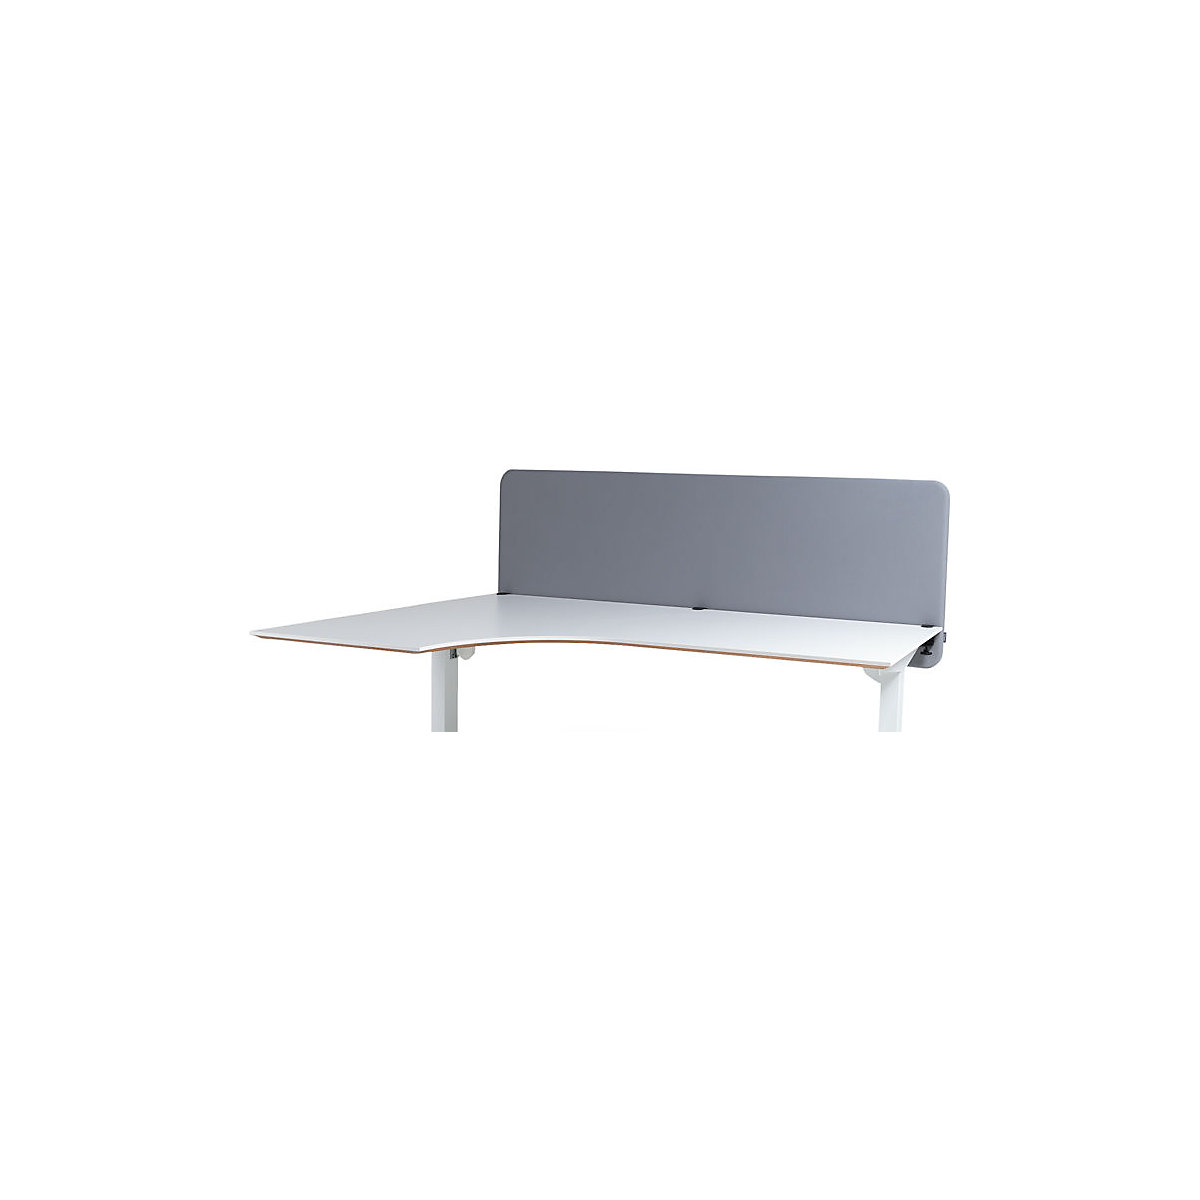 Softline Event acoustic desk partition, suspended downwards, HxW 650 x 1800 mm, fabric, light grey-1